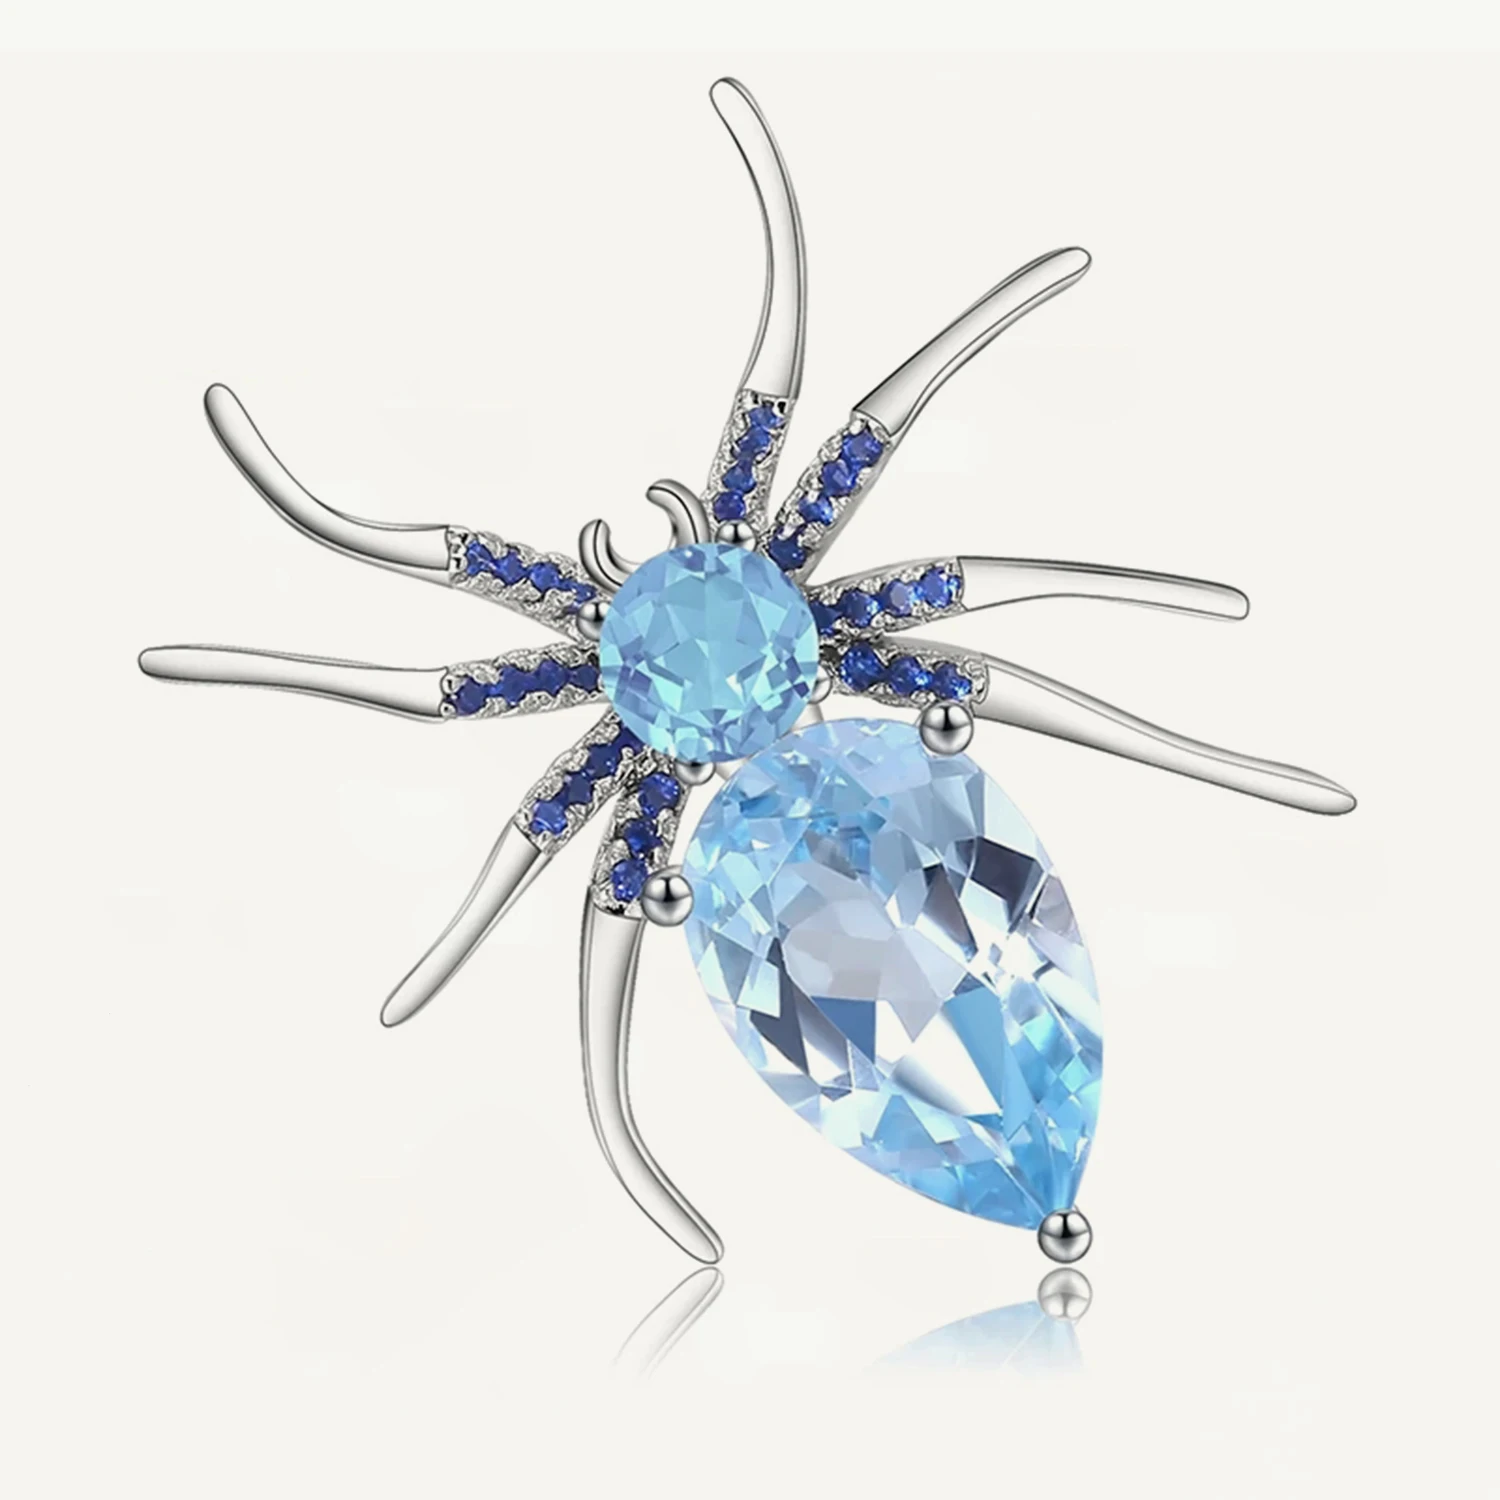 

GEM'S BALLET 5.9Ct Natural Sky Blue Topaz Spider Brooches Sterling Sliver 925 Gothic Vintage Brooch For Women Party Fine Jewelry